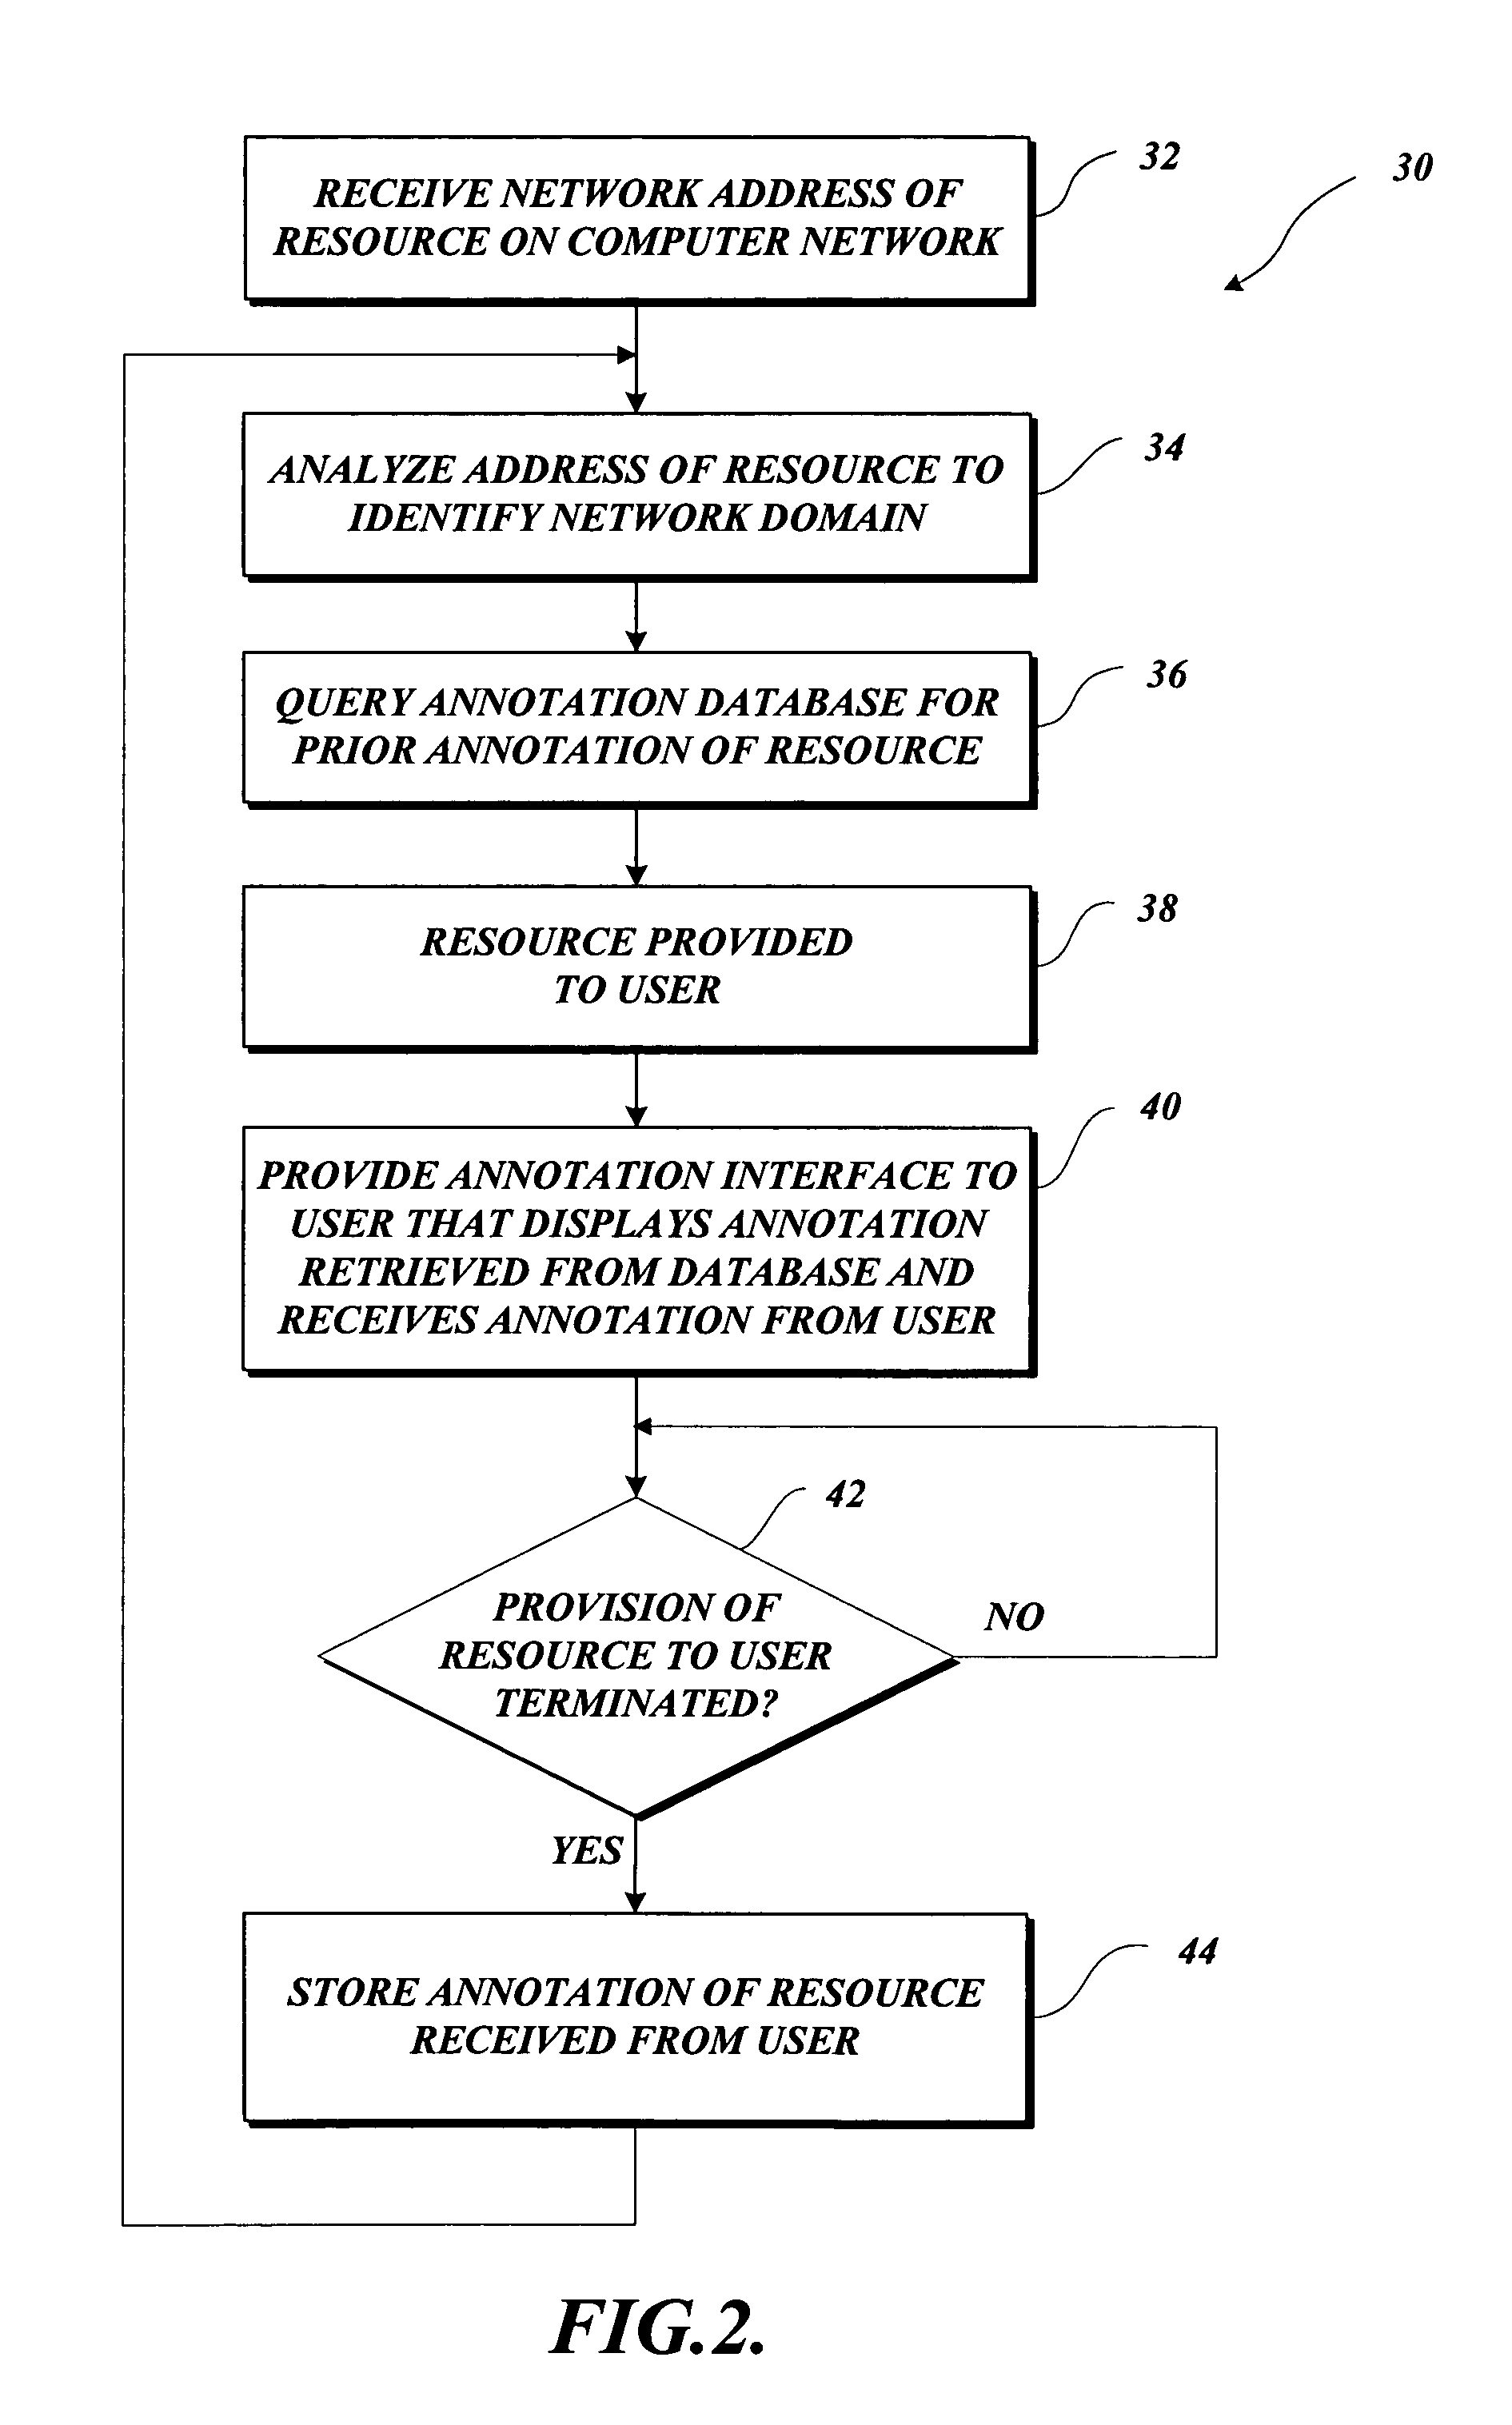 Automated annotation of a resource on a computer network using a network address of the resource